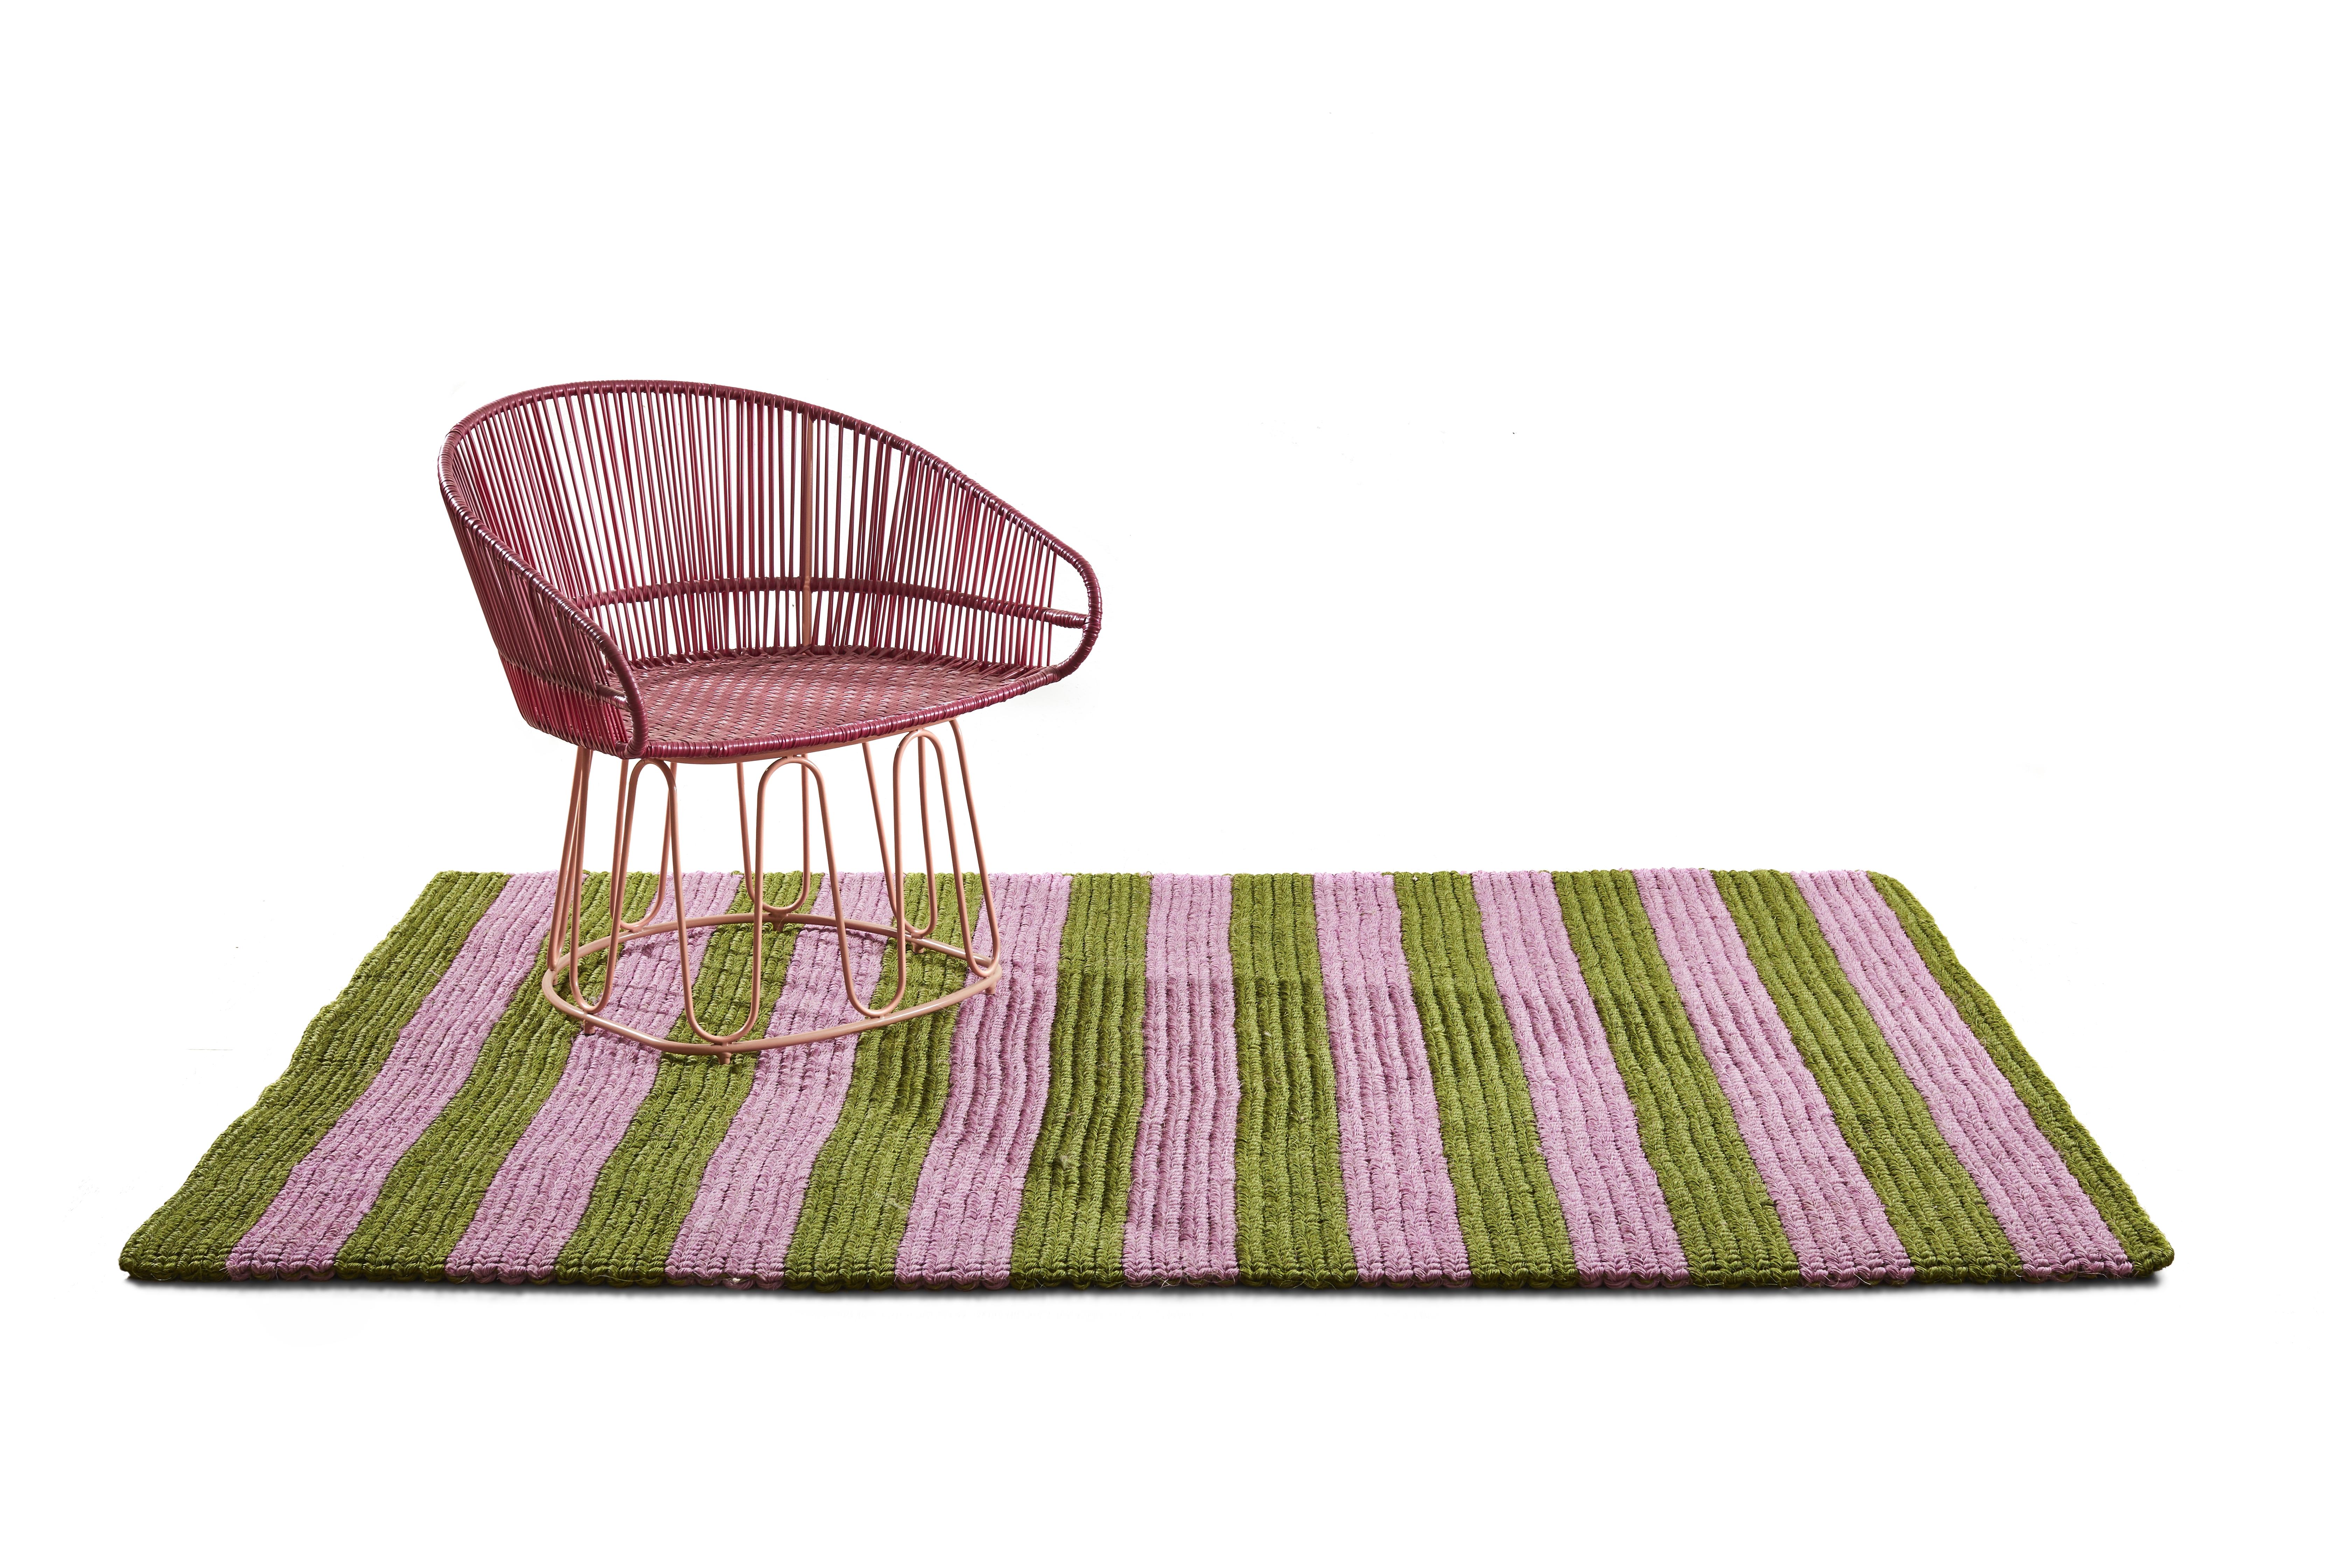 Medium Par Raya rug by Sebastian Herkner
Materials: Fibres from Jipi palm leaves fibres. 
Technique: Naturally dyed fibers. Hand-woven in Colombia.
Dimensions: W 200 x L 300 cm 
Available in colors: brownish purple/ rust, flax/ kurkuma, black/